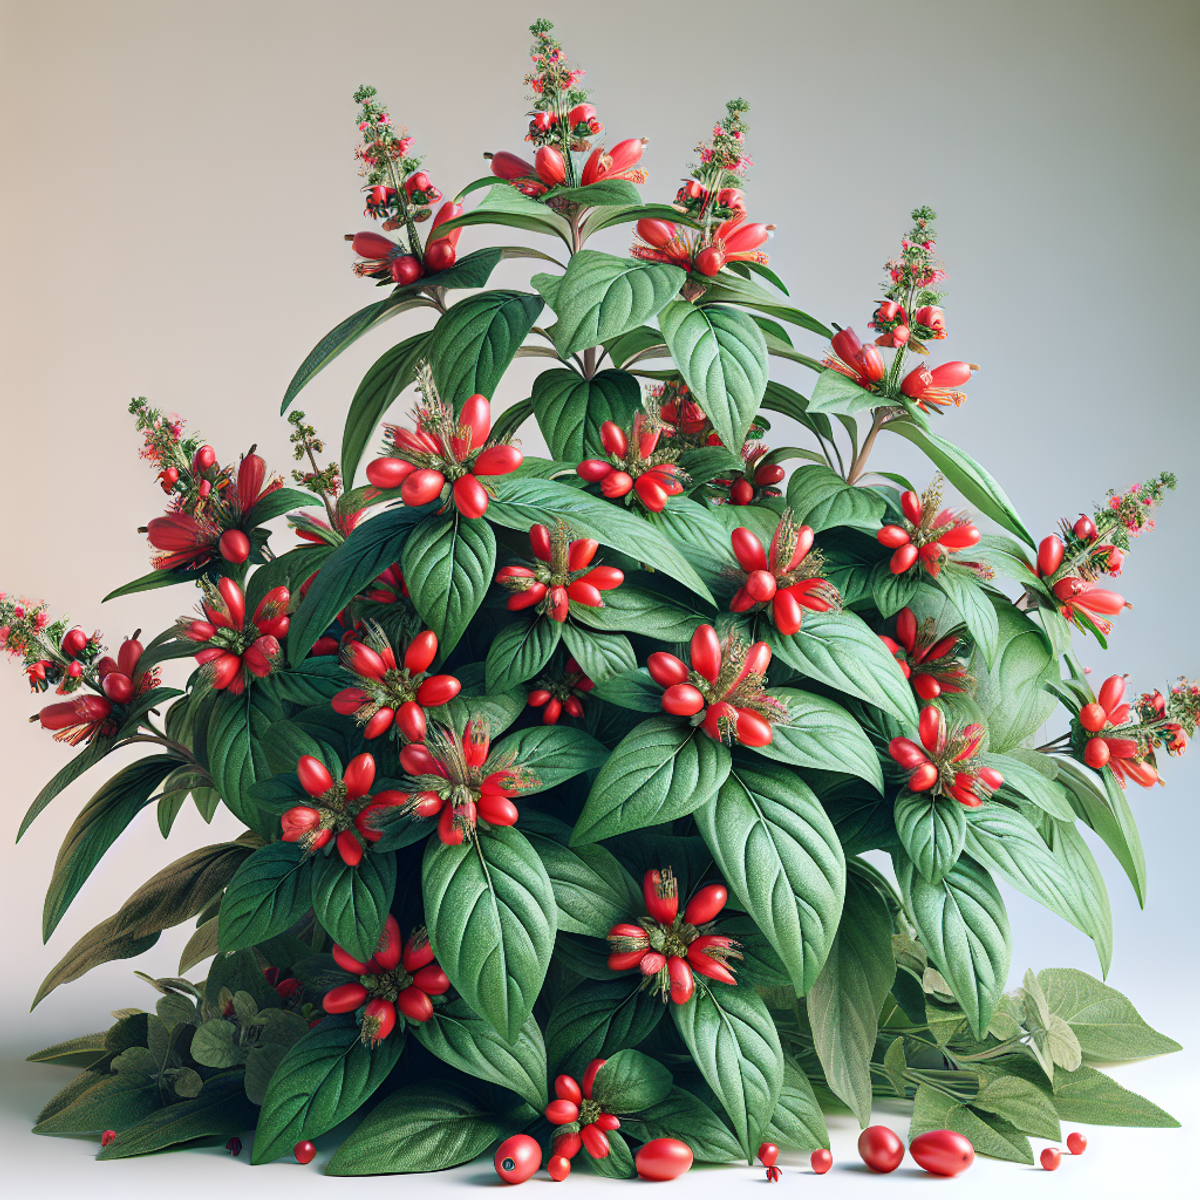 Vibrant Ashwagandha plant with red berries and green leaves in natural environment.